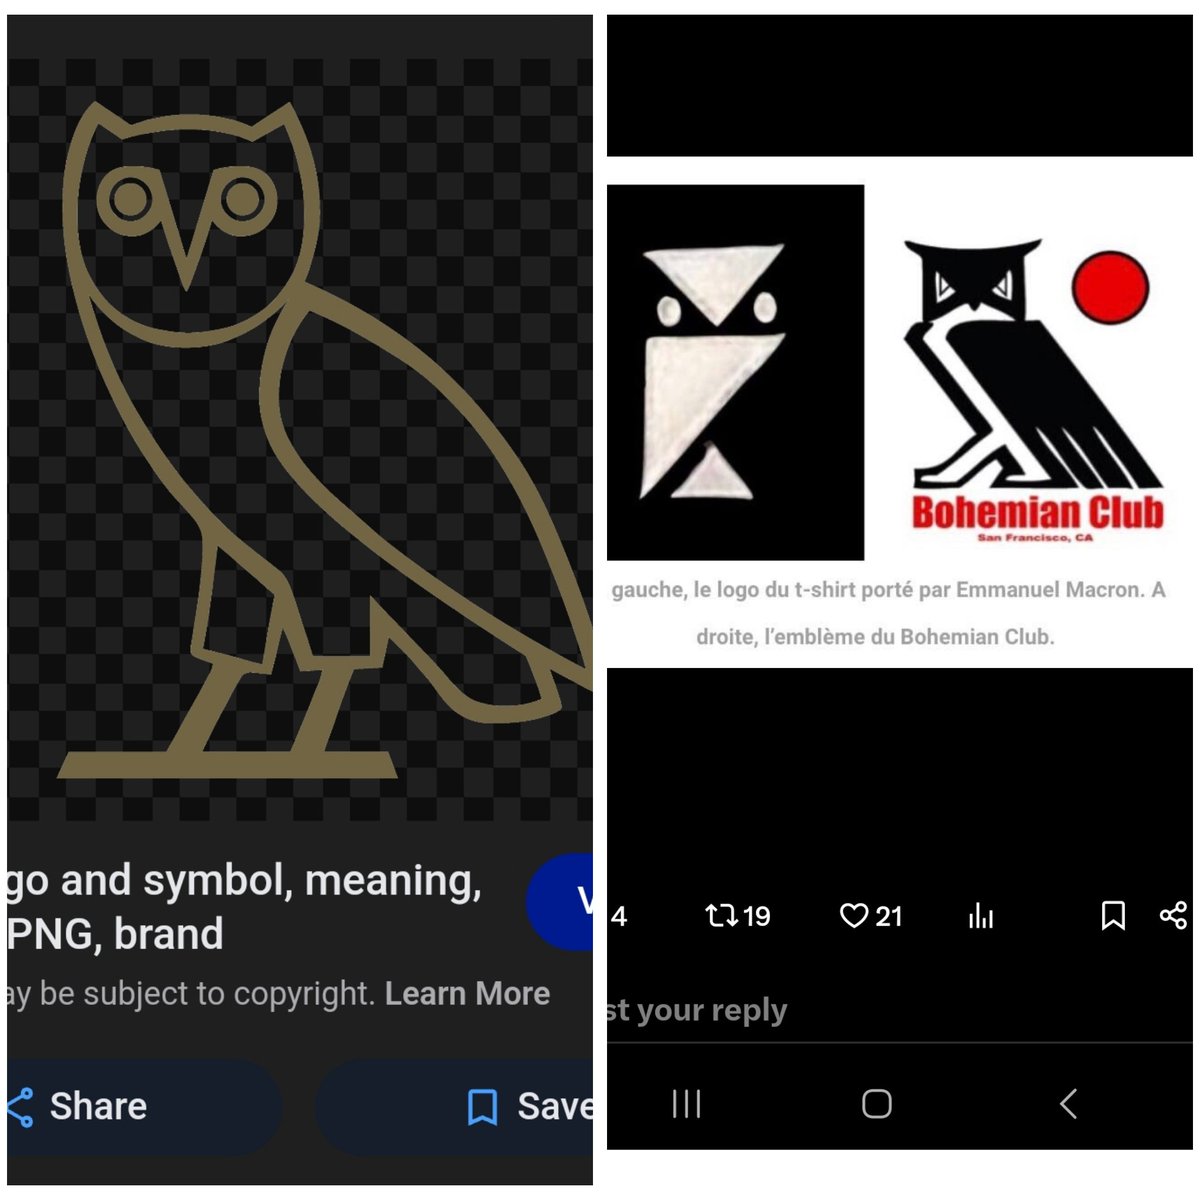 @itsjvck Now that some things have been said ..... let's talk about drakes Owl logo ..... & the Bohemian club owl 🤔🤔 
For those that don't know .... search about the elites yearly sacrifice